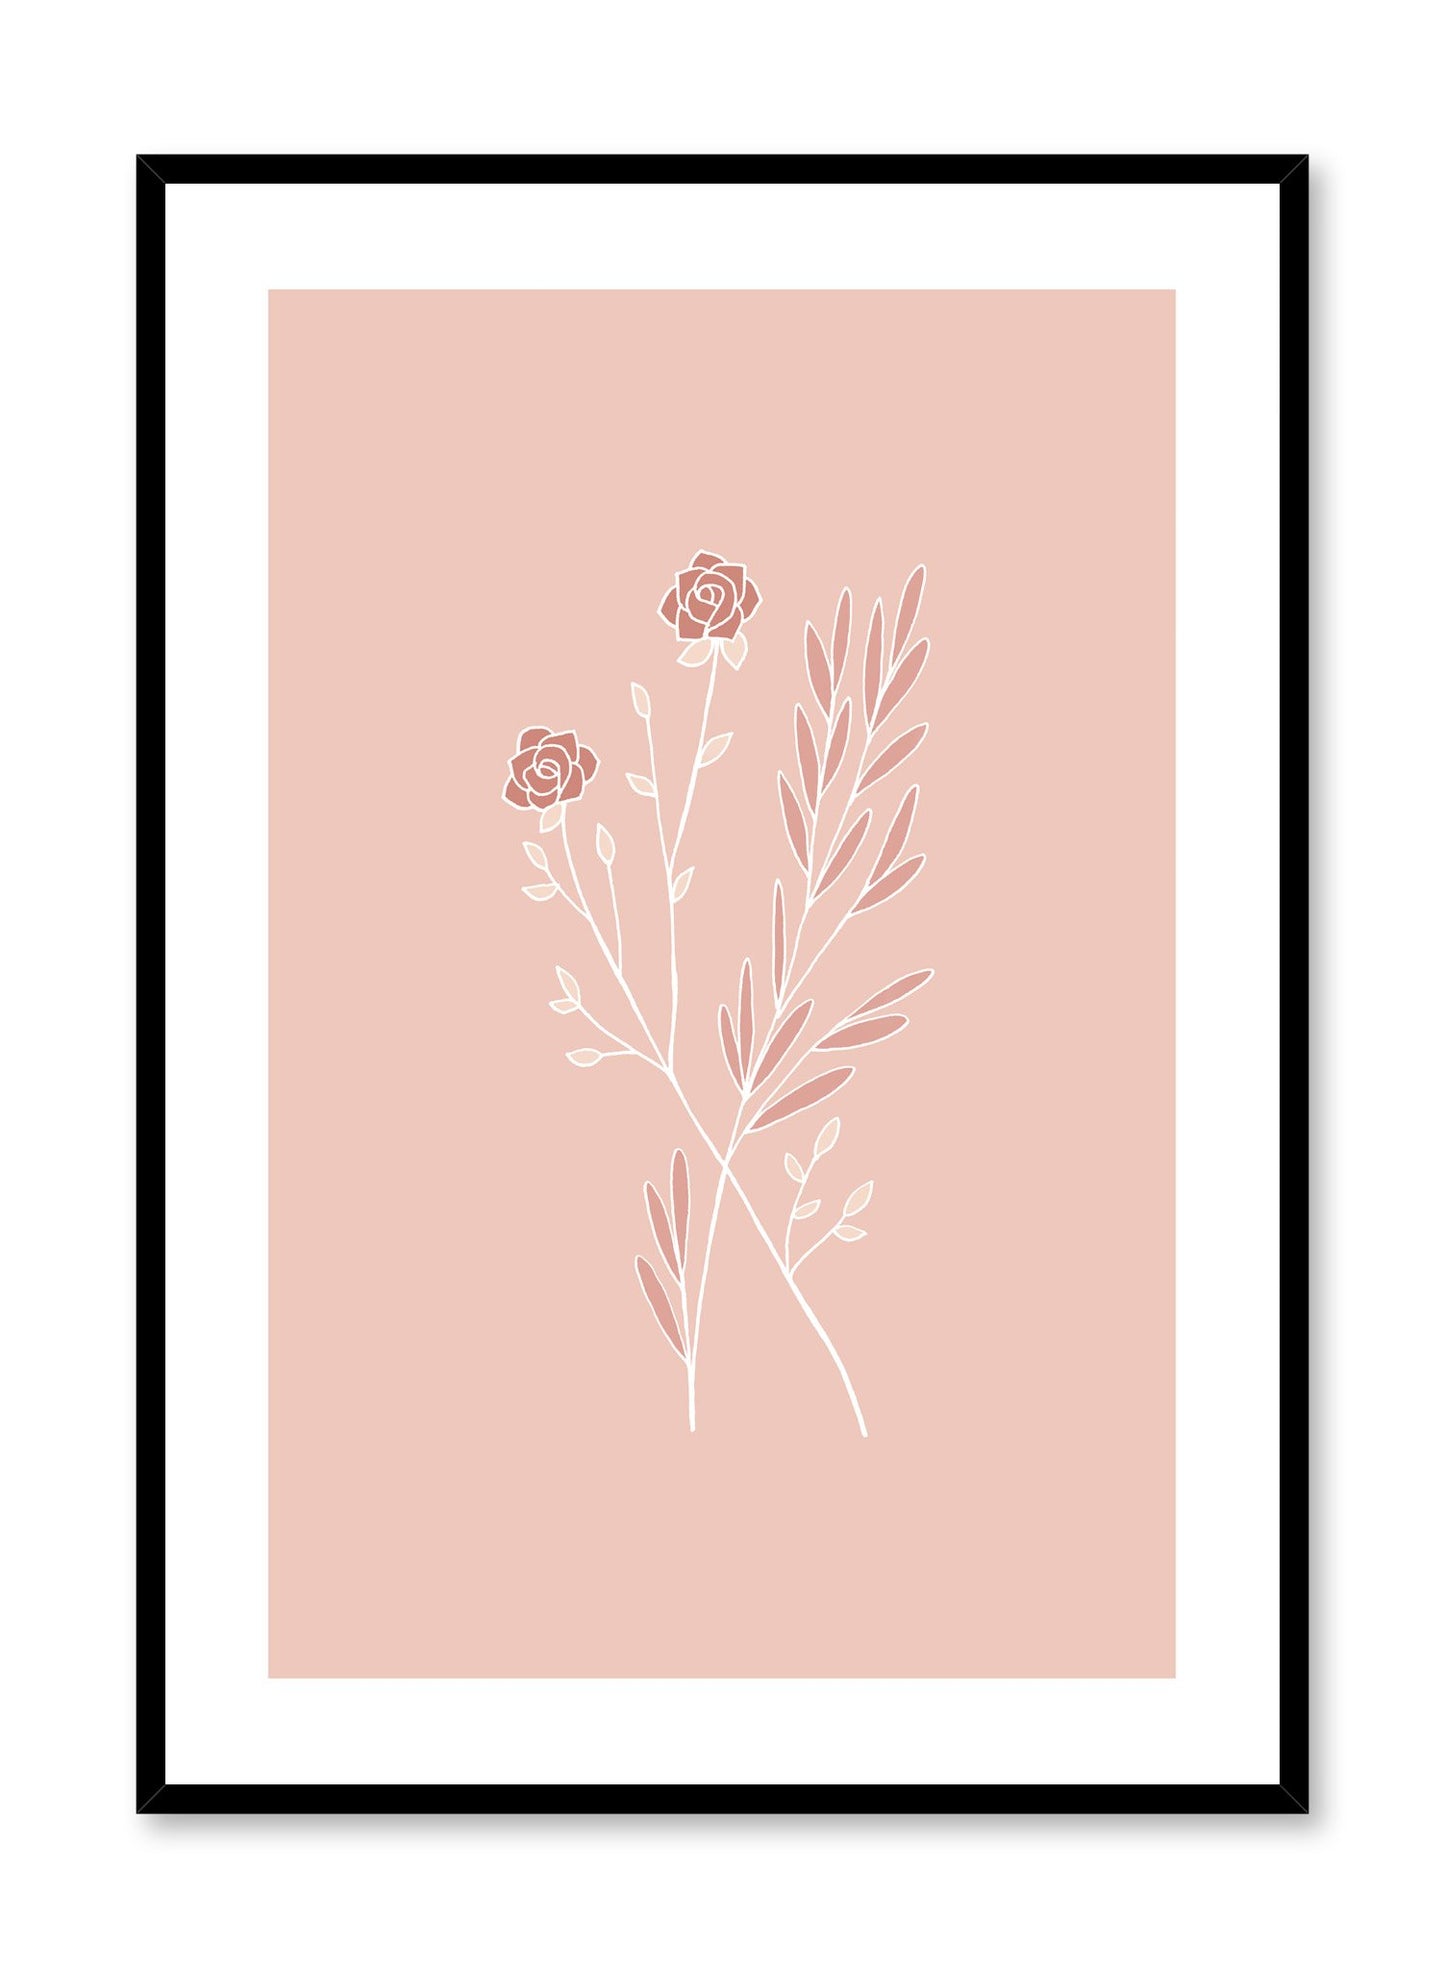 Modern minimalist botanical illustration poster by Opposite Wall with Star-Crossed plants in pink